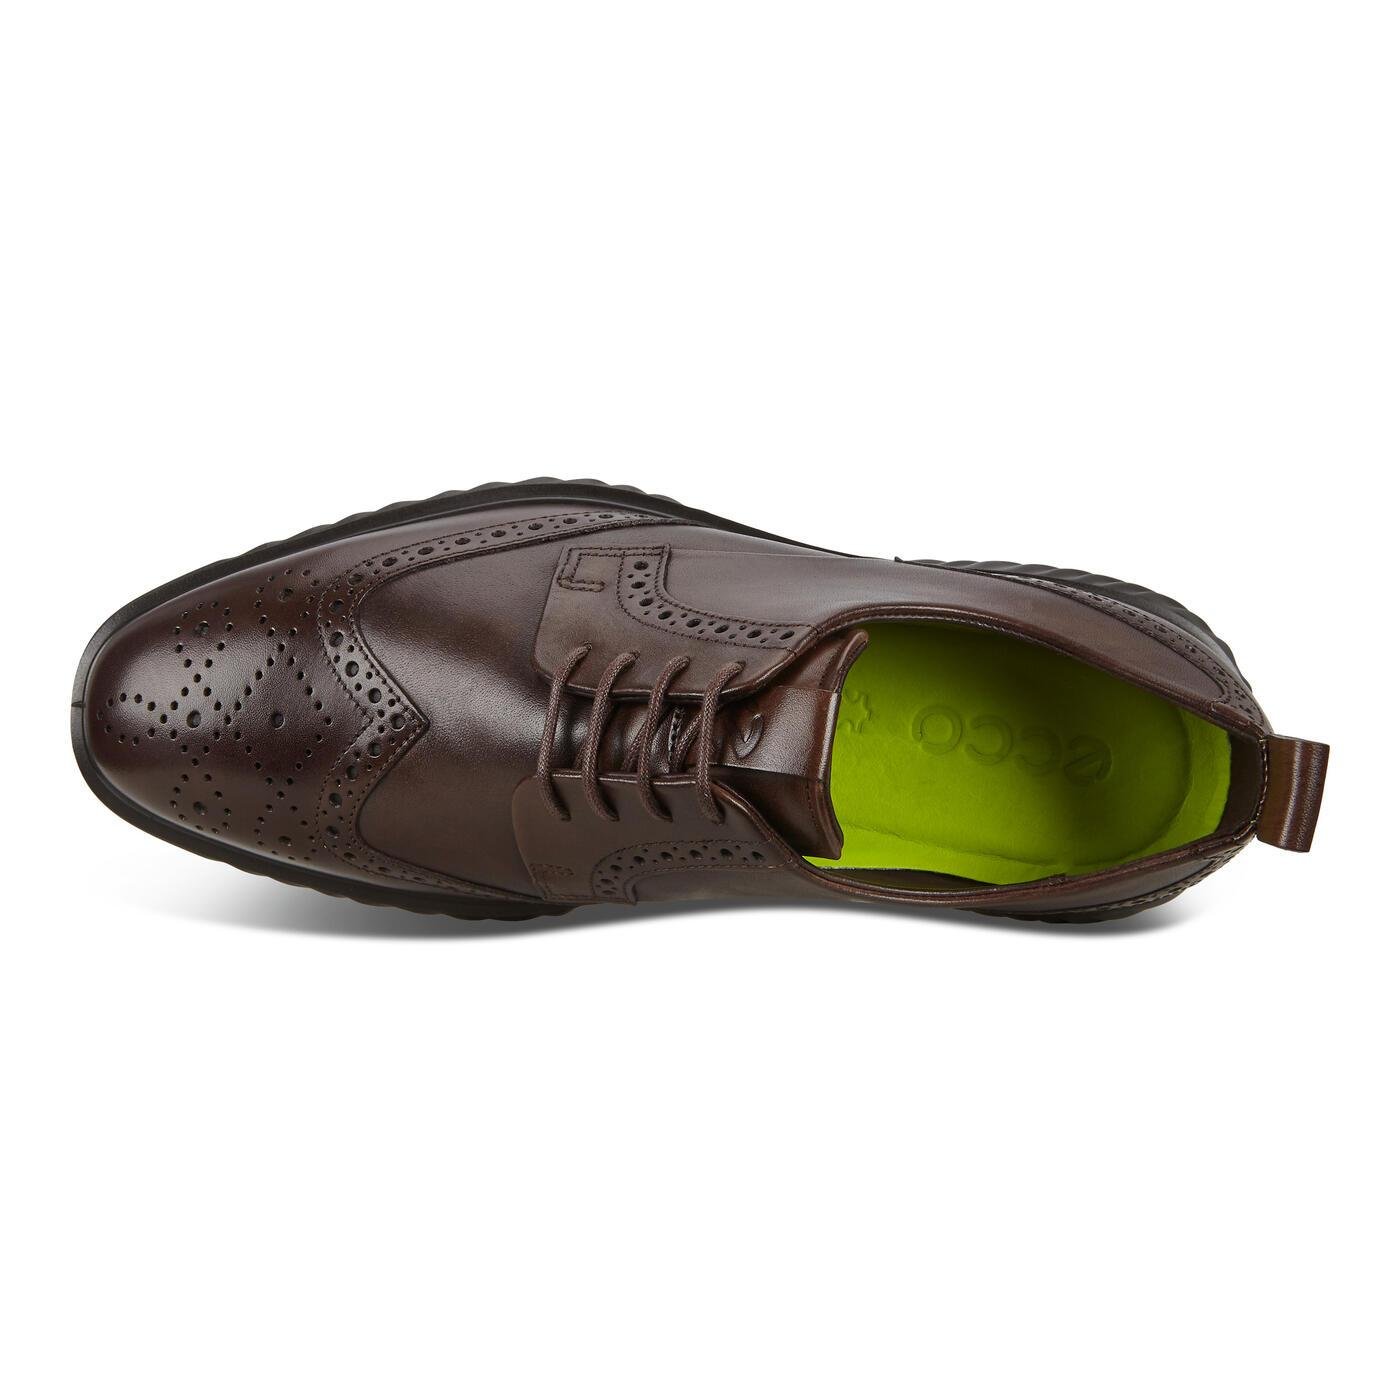 Ecco St.1 Hybrid Lite Wingtip Brogue Shoes in Cocoa Brown (Brown) for Men -  Lyst